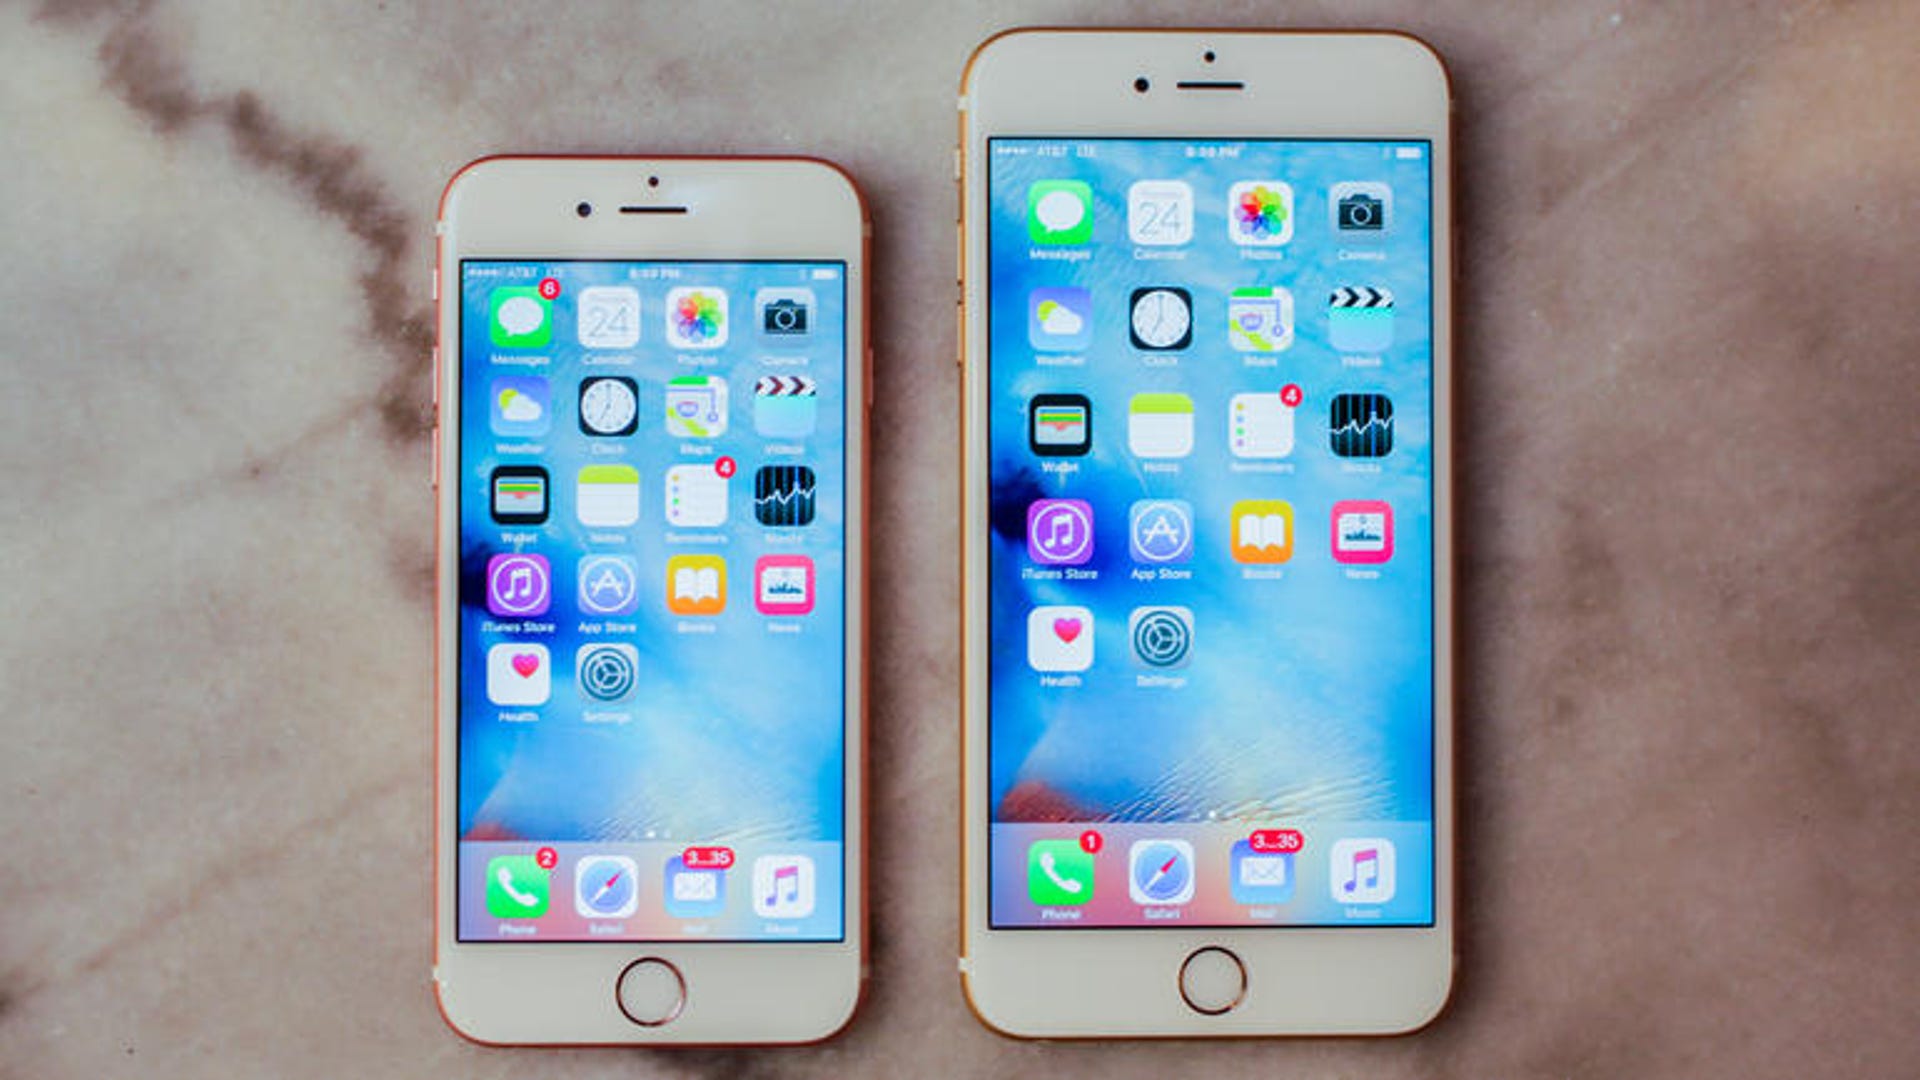 The iPhone 6S and 6S Plus successors could double sotrage to 256GB​.